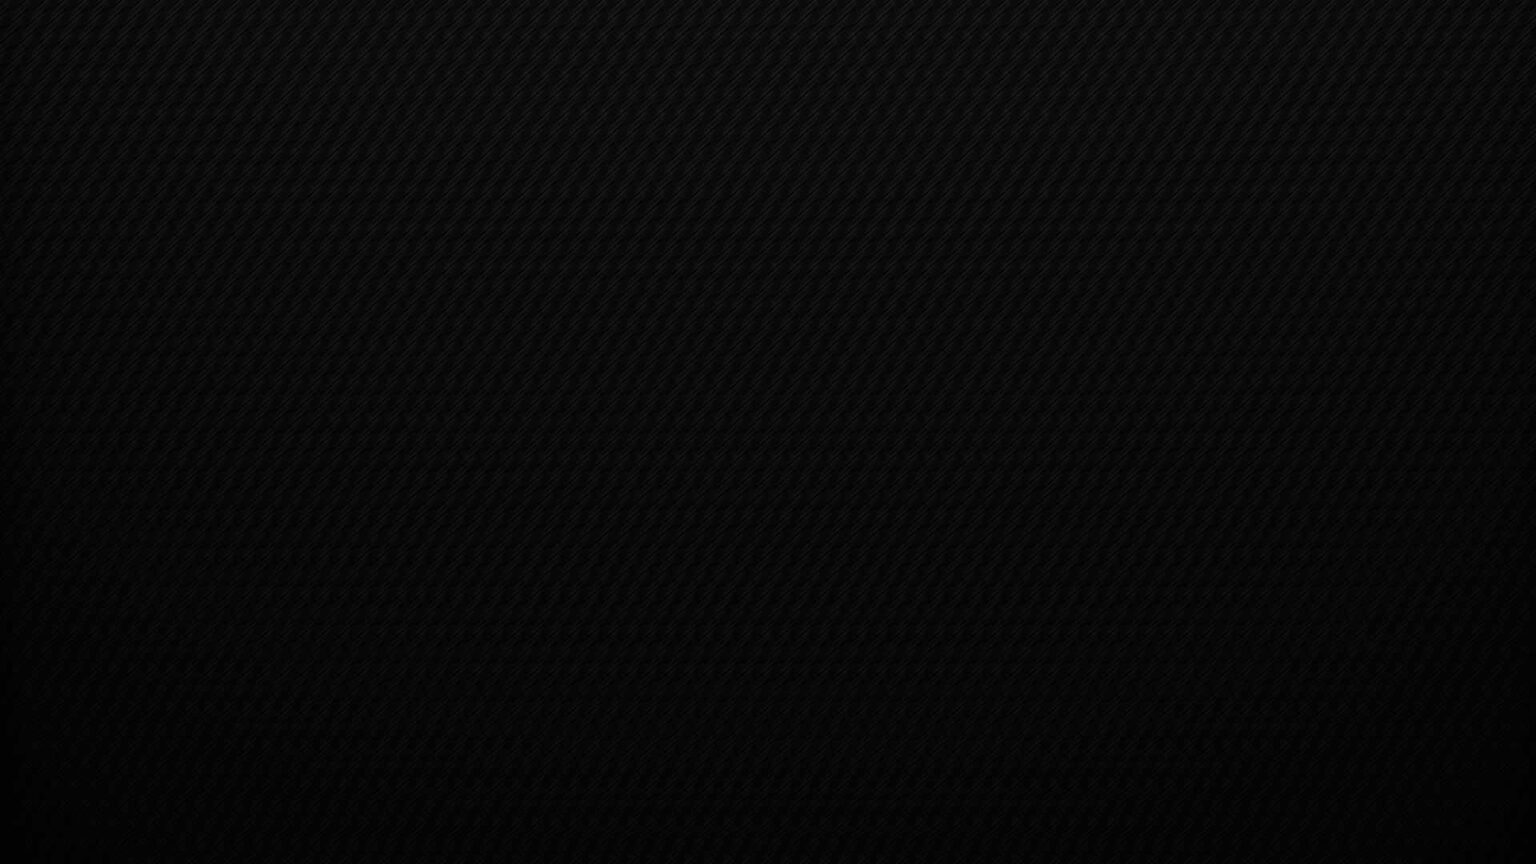 Plain Black Wallpapers and Backgrounds [Full HD]